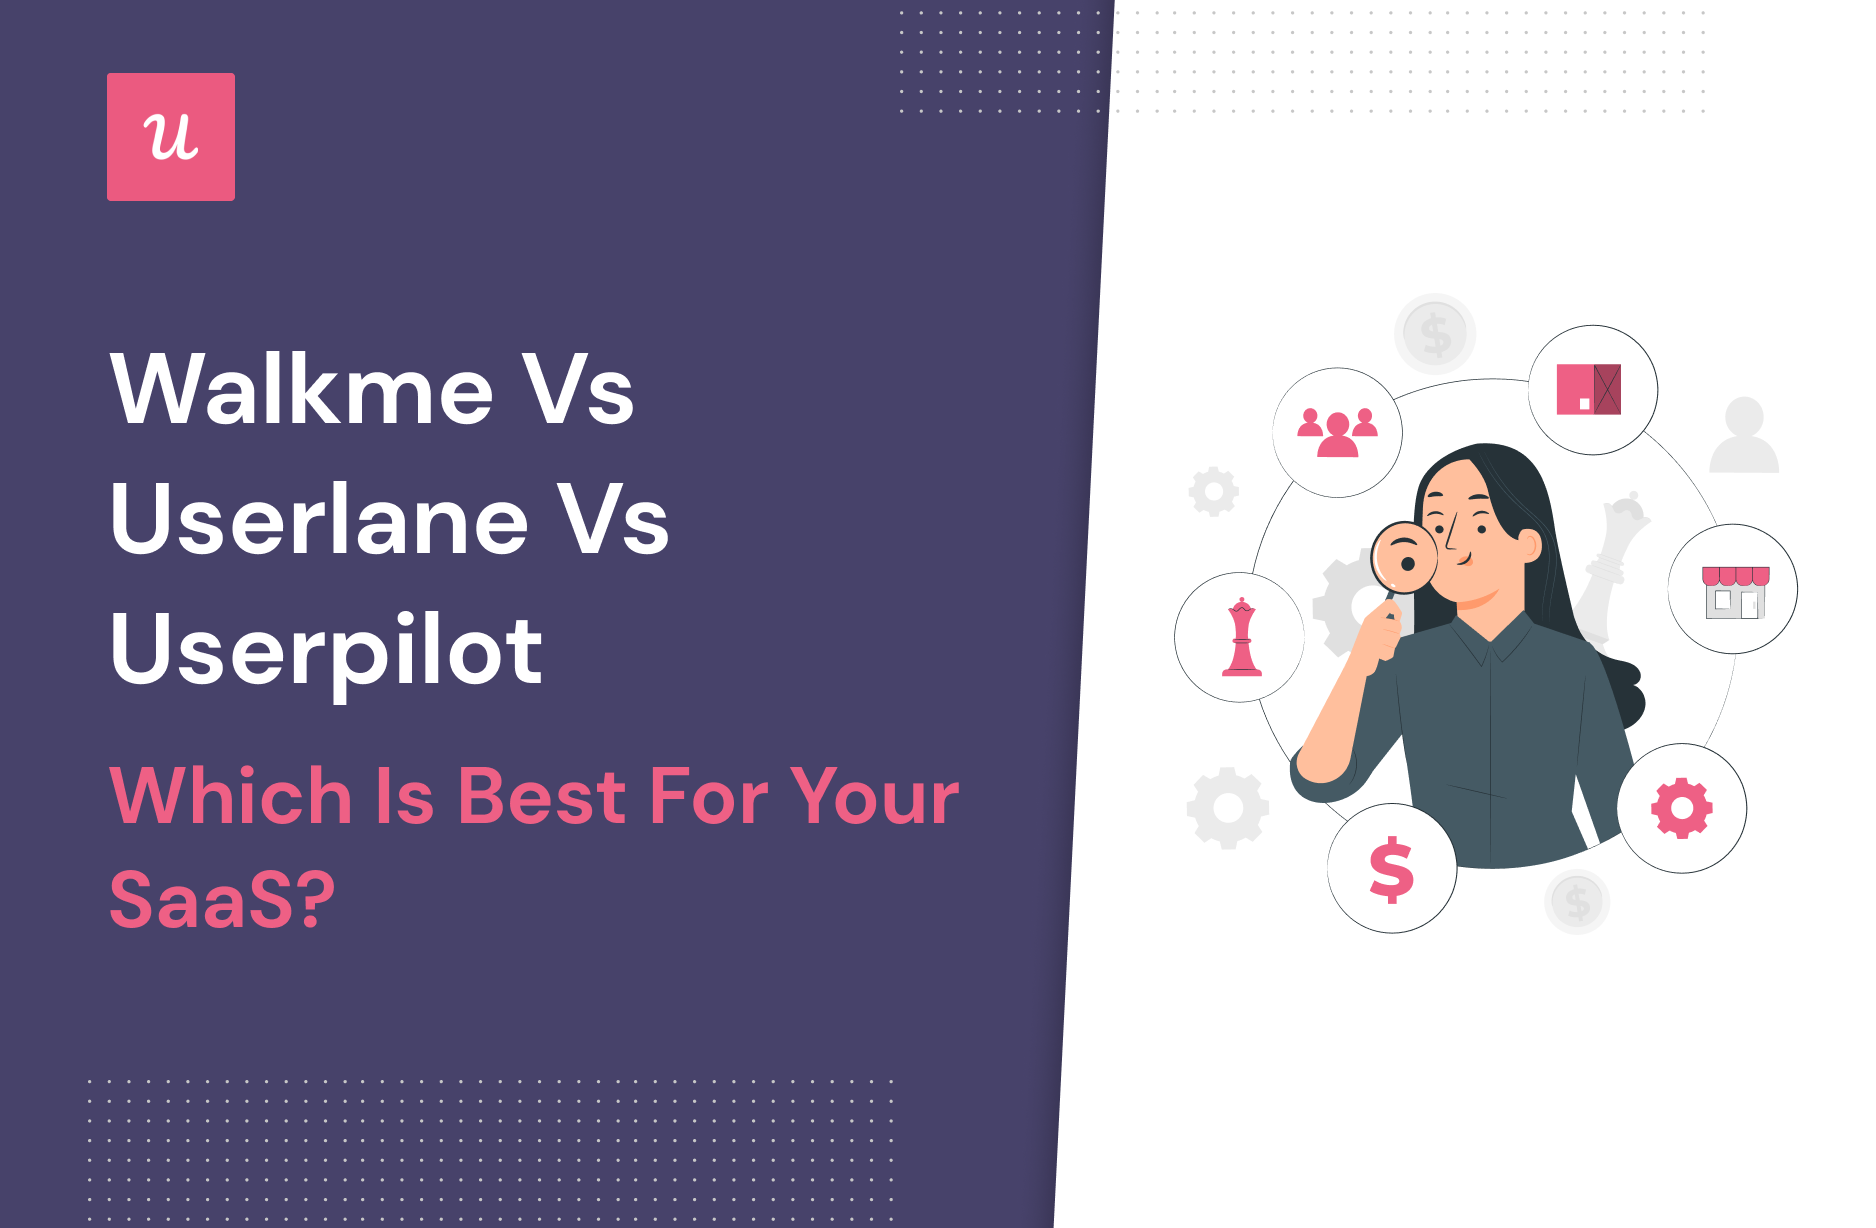 Walkme vs Userlane vs Userpilot – Which is Best for Your SaaS